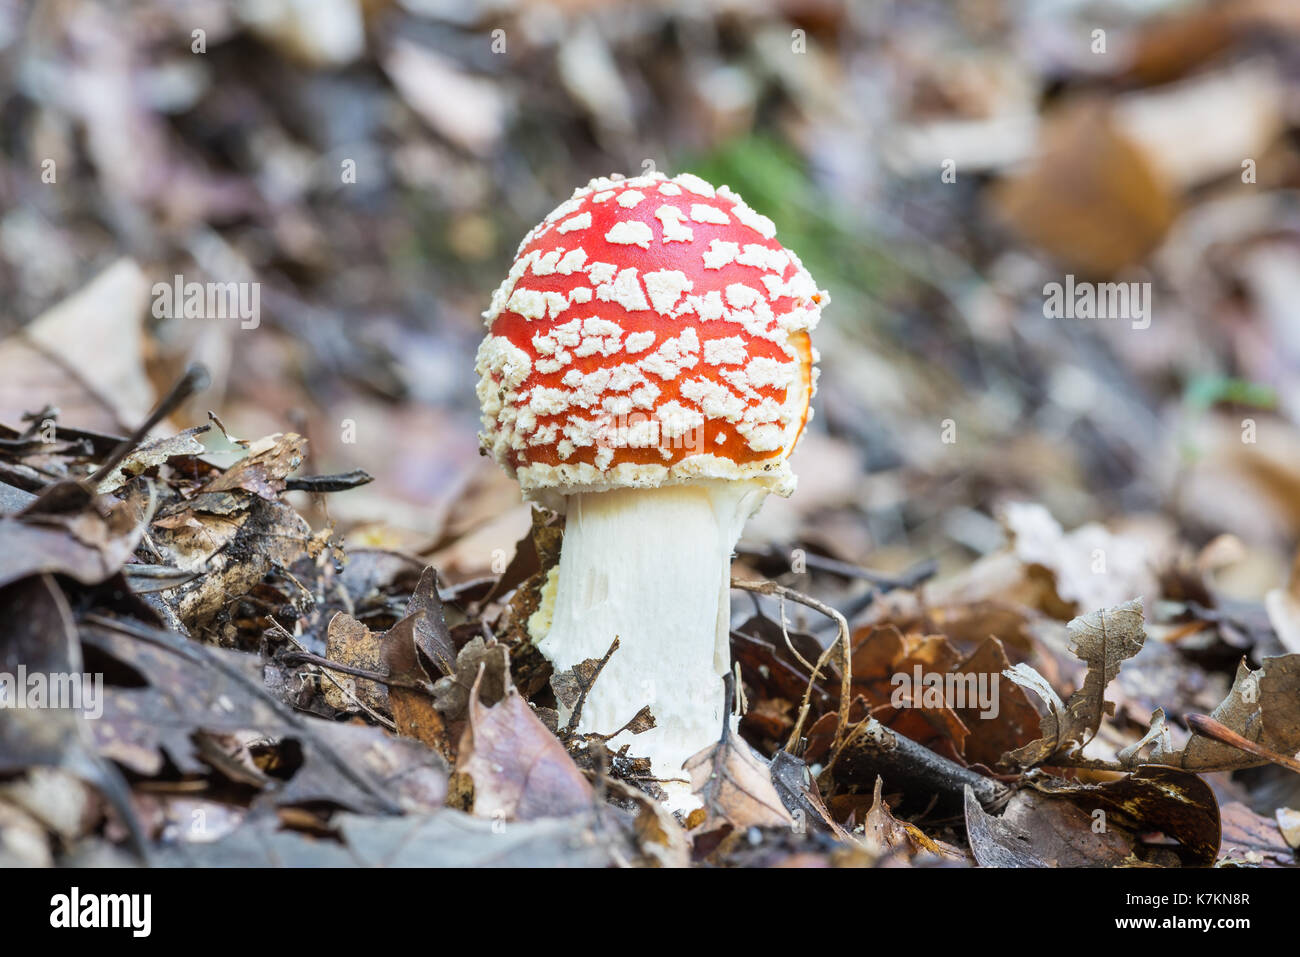 Fly agaric or fly amanita (Amanita Muscaria) mushroom. Young poisonous fungus, red with white spots, in its natural habitat Stock Photo